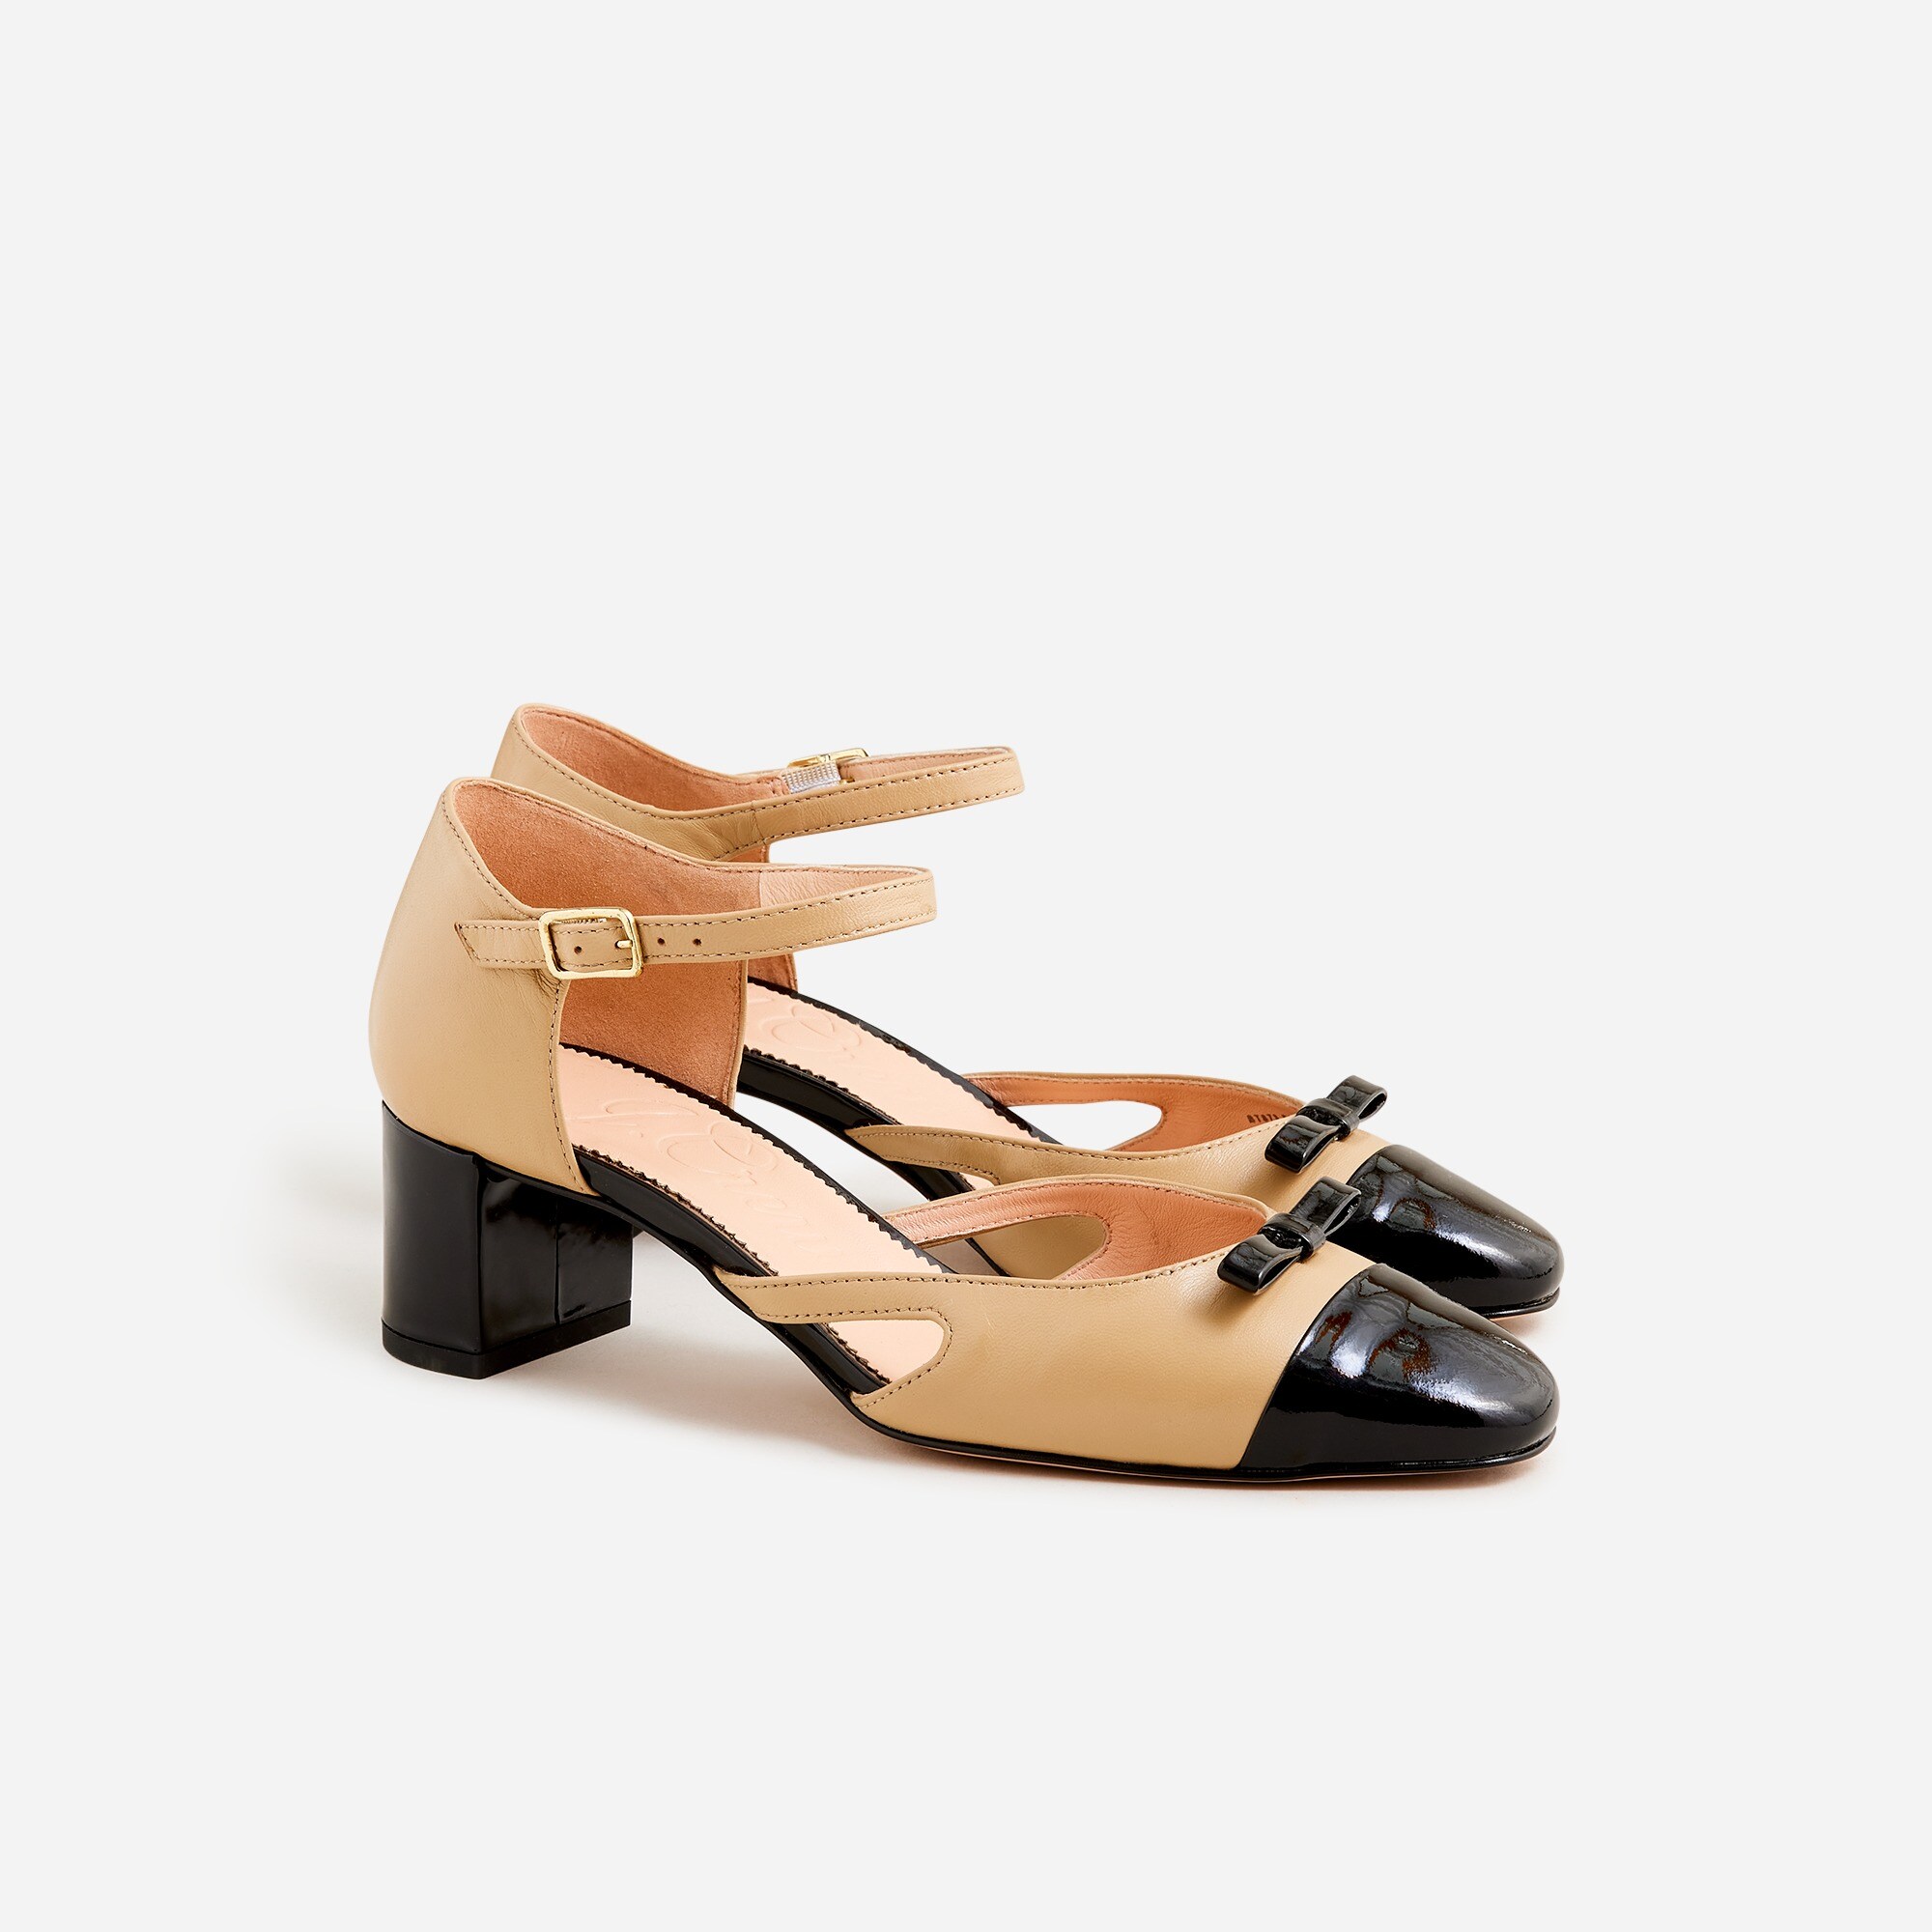  Millie ankle-strap cutout heels in leather